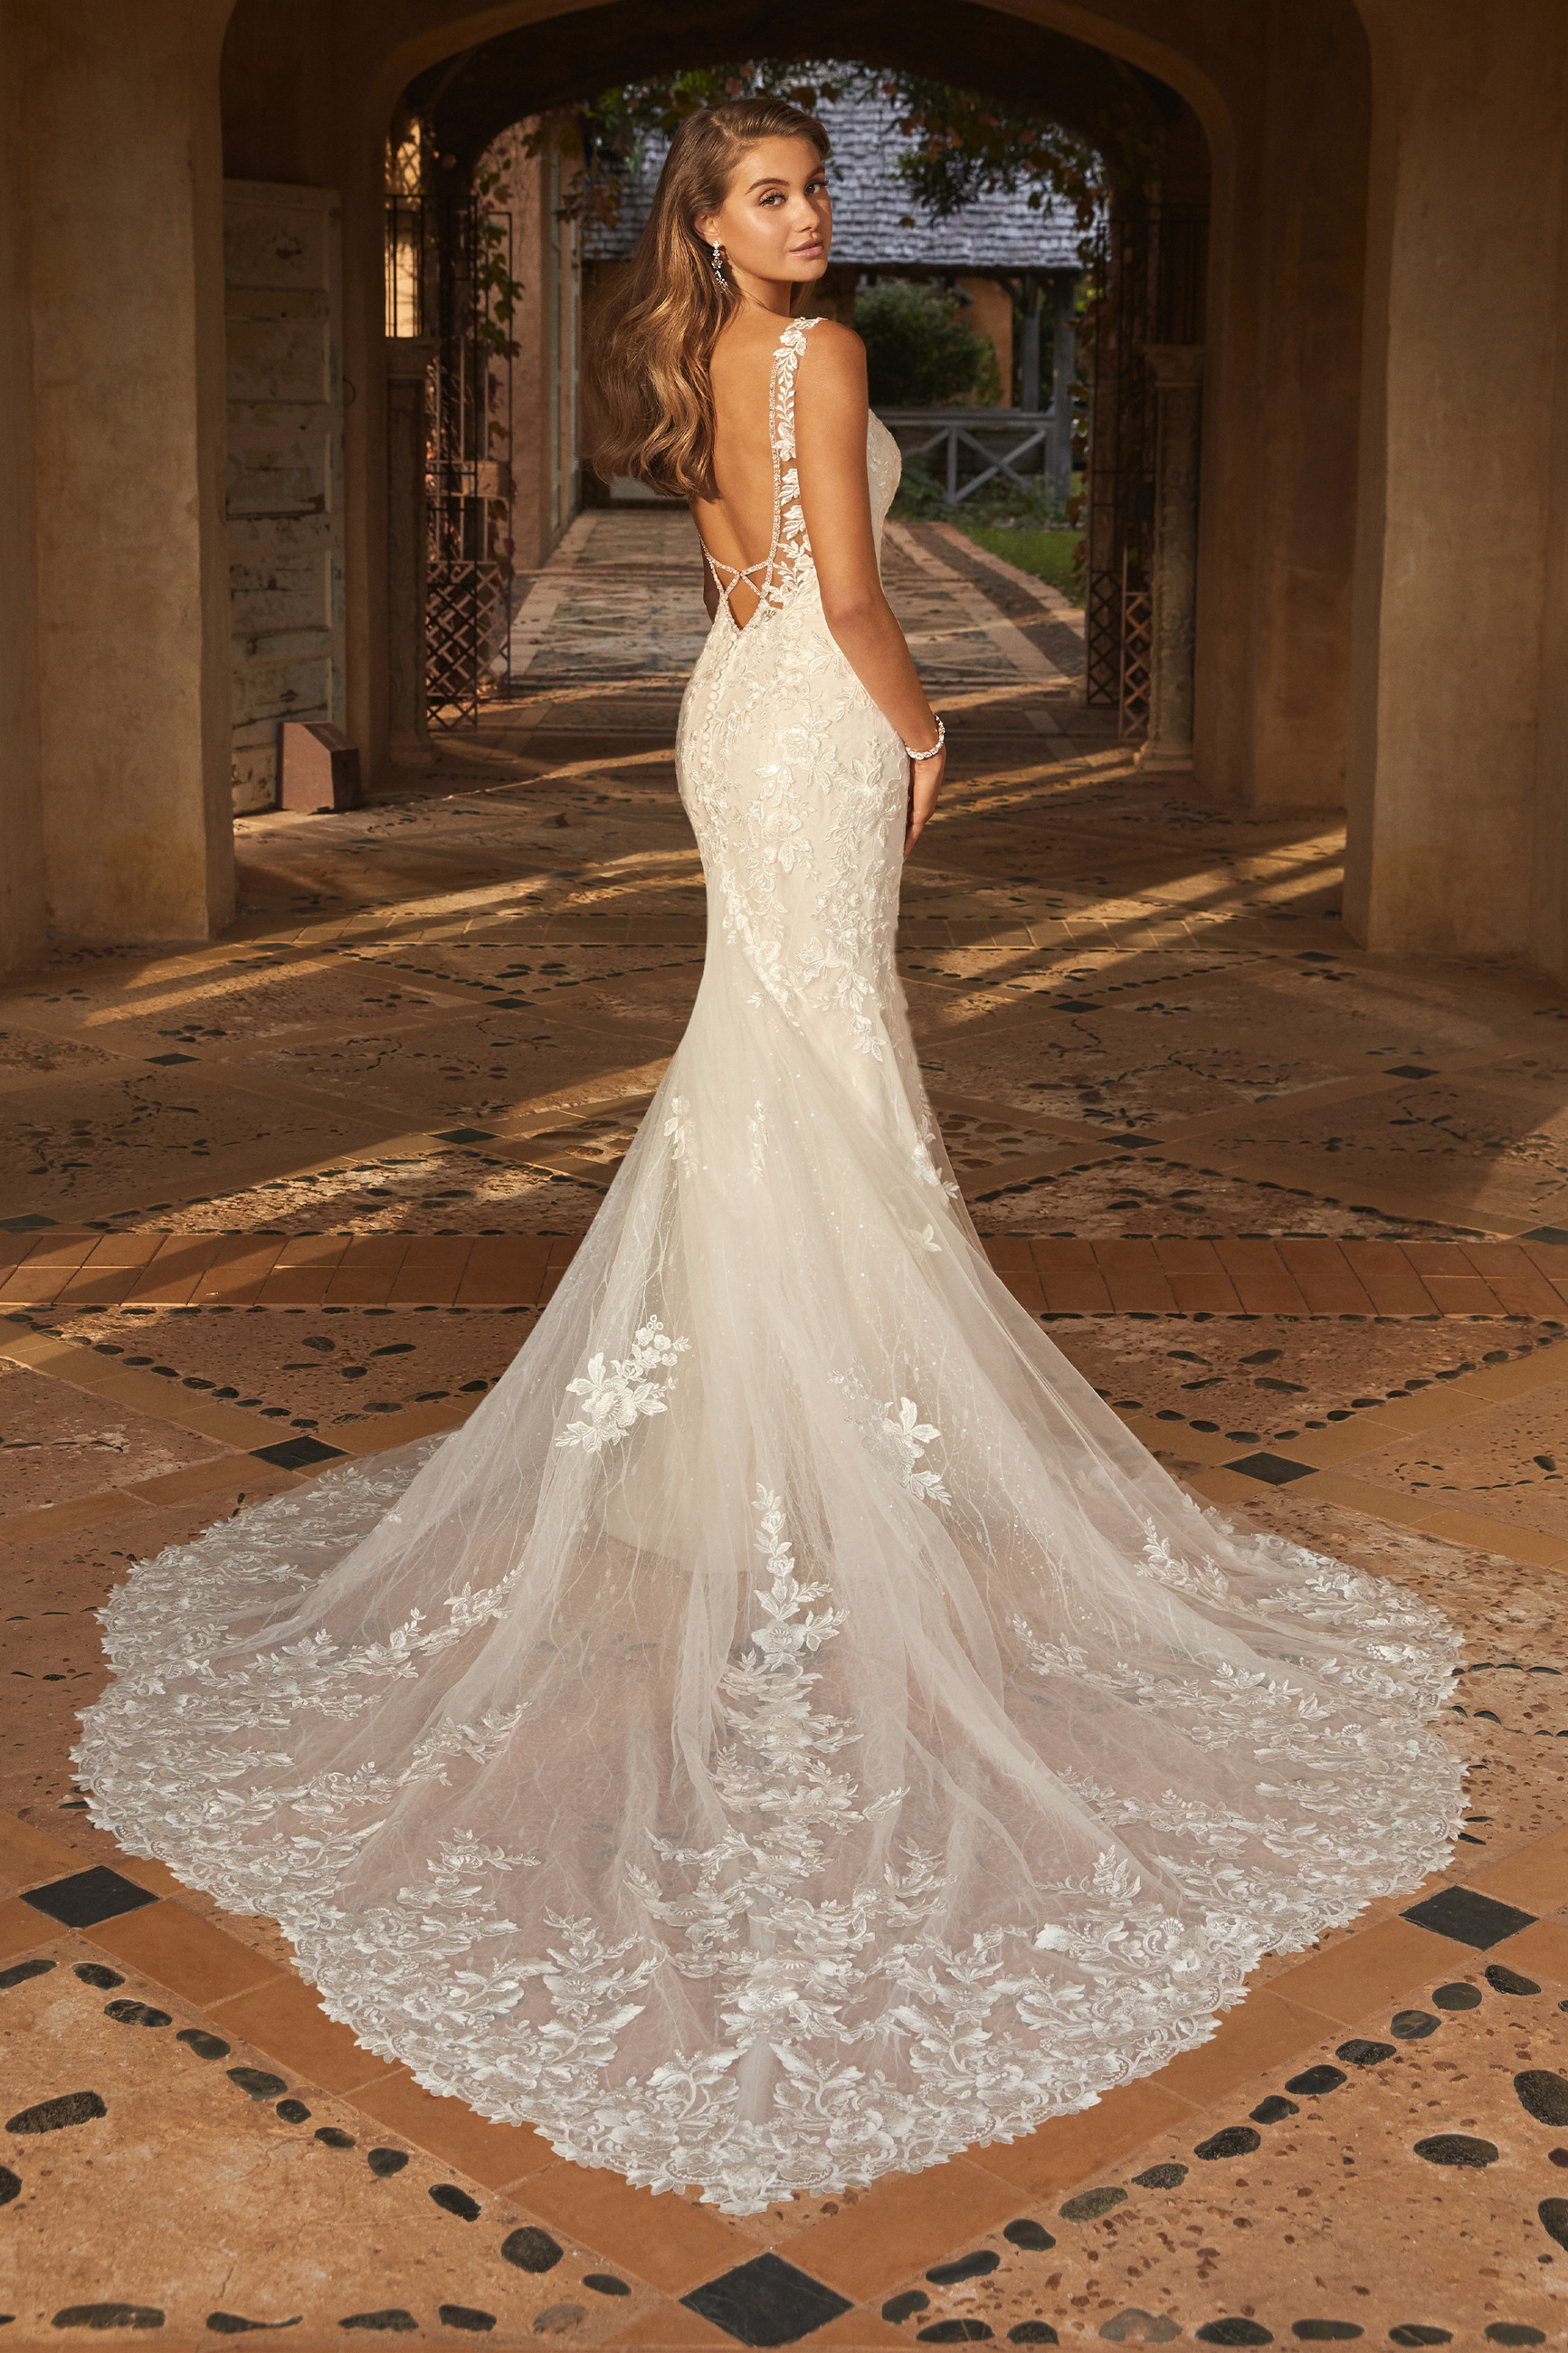 Stunning Lace Wedding Dress with Low ...